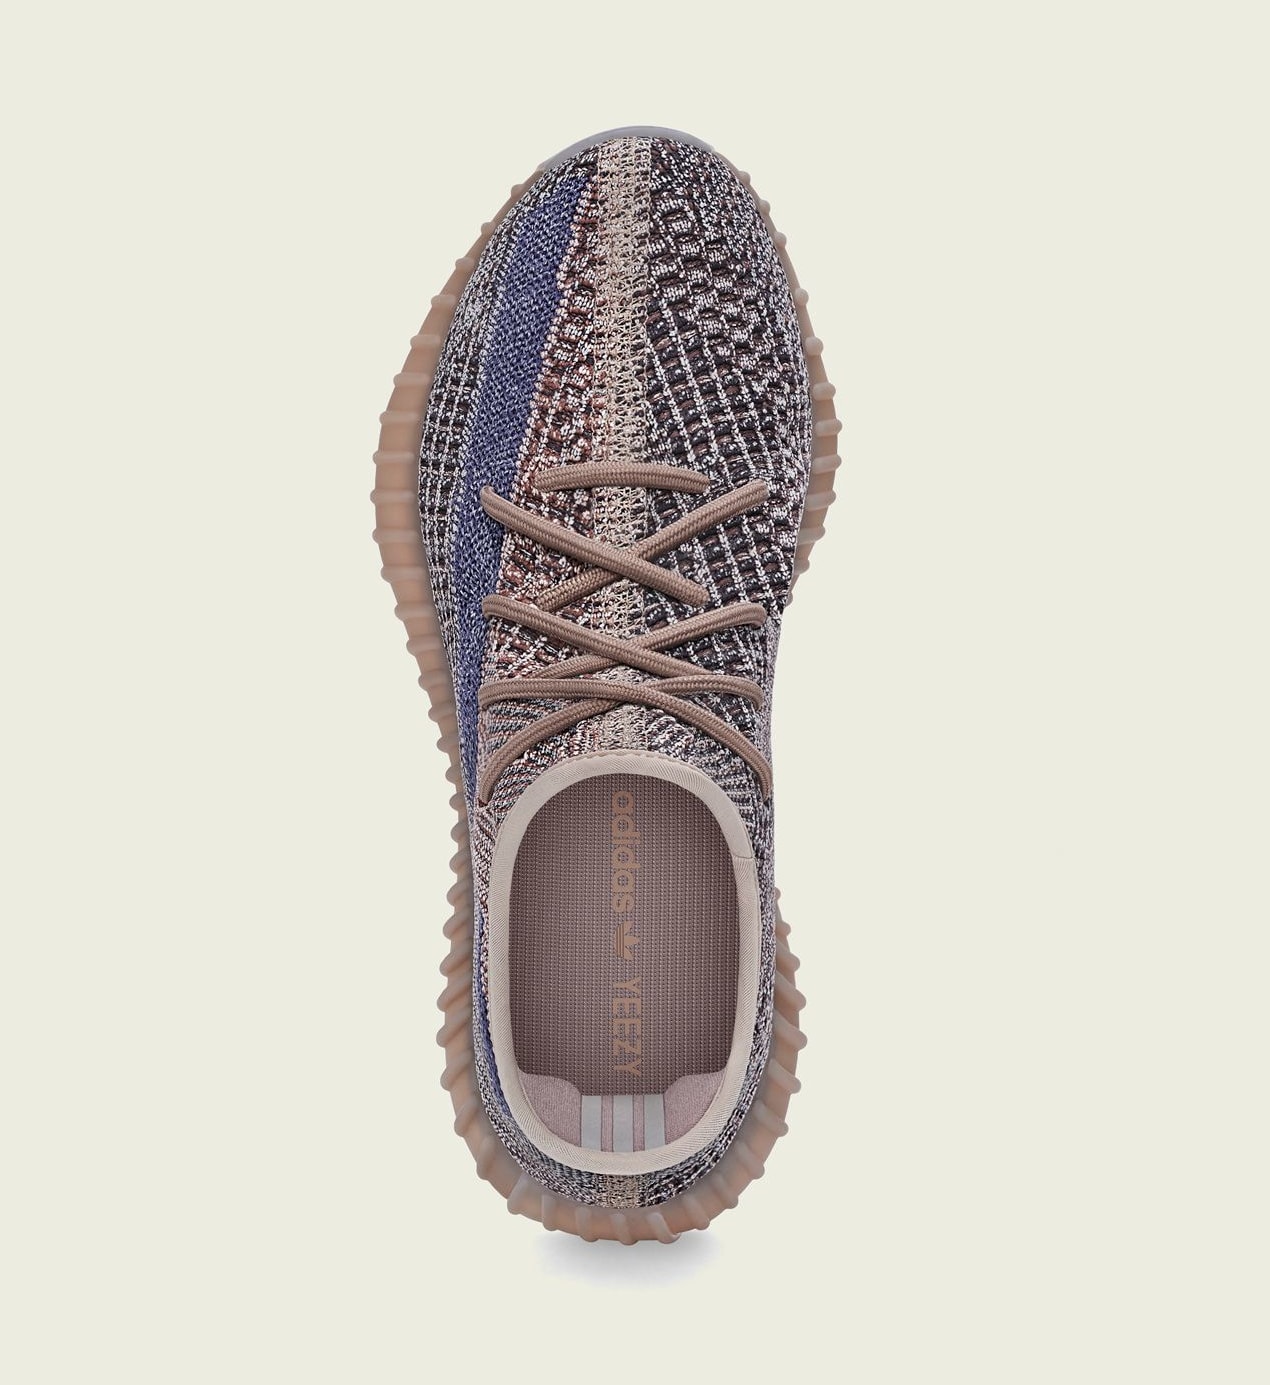 adidas yeezy boost 350 v2 release